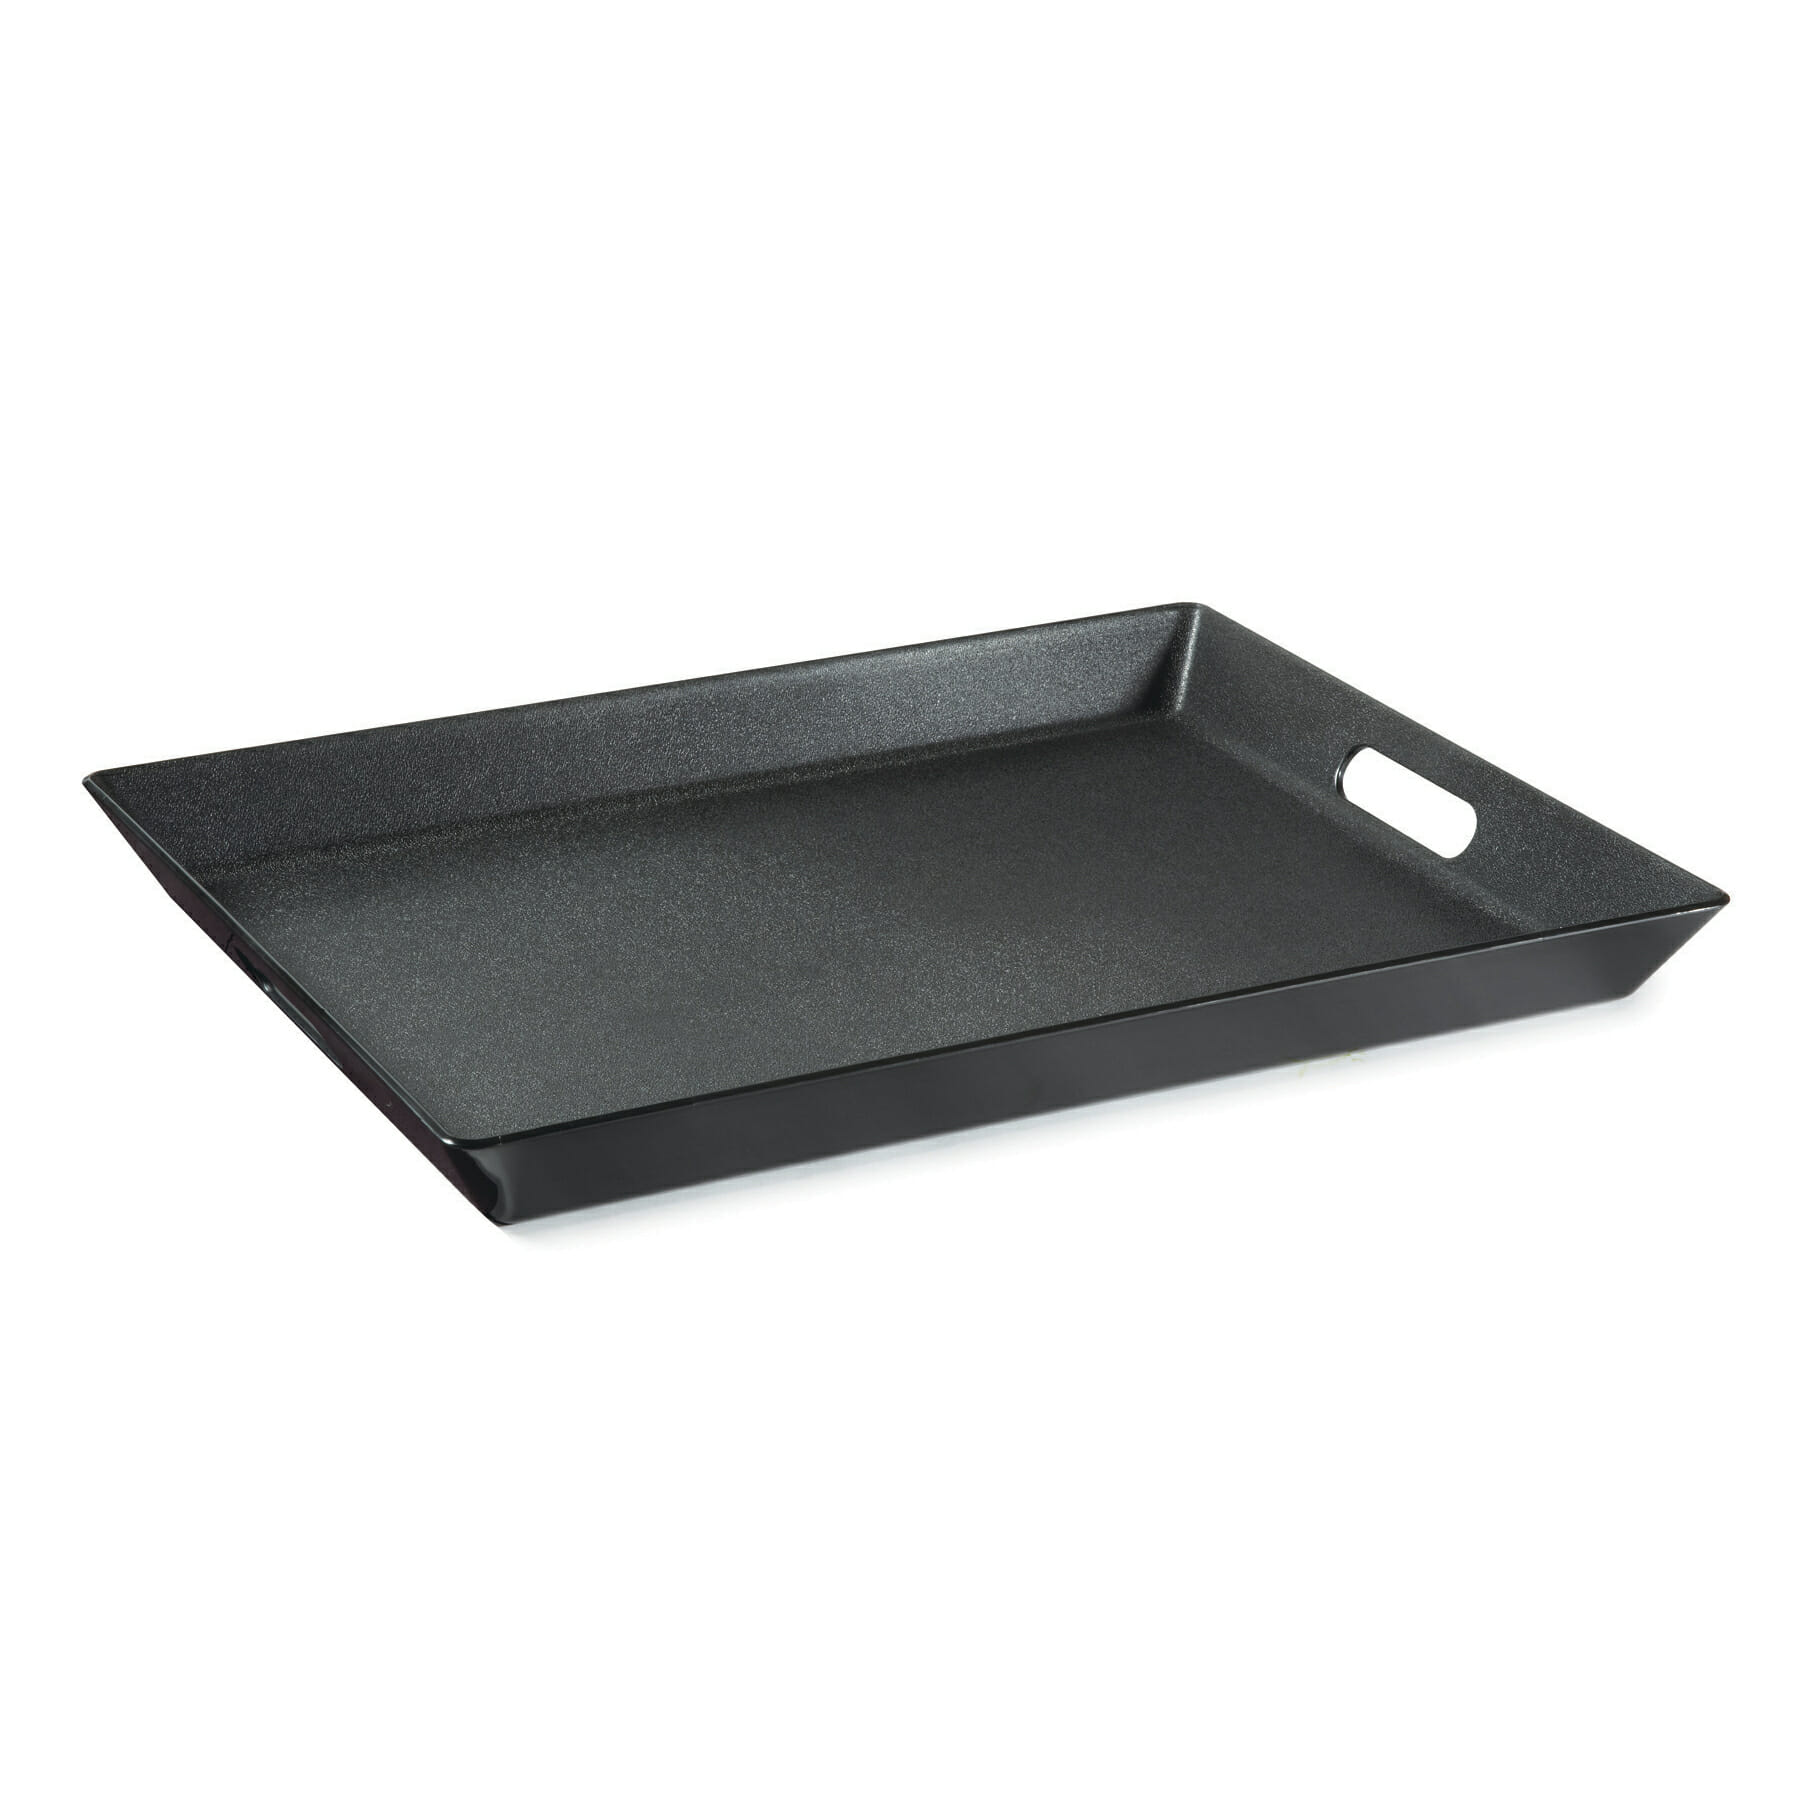 OMEGA-PRINT Disposable Fuming Trays (25 each) from Sirchie